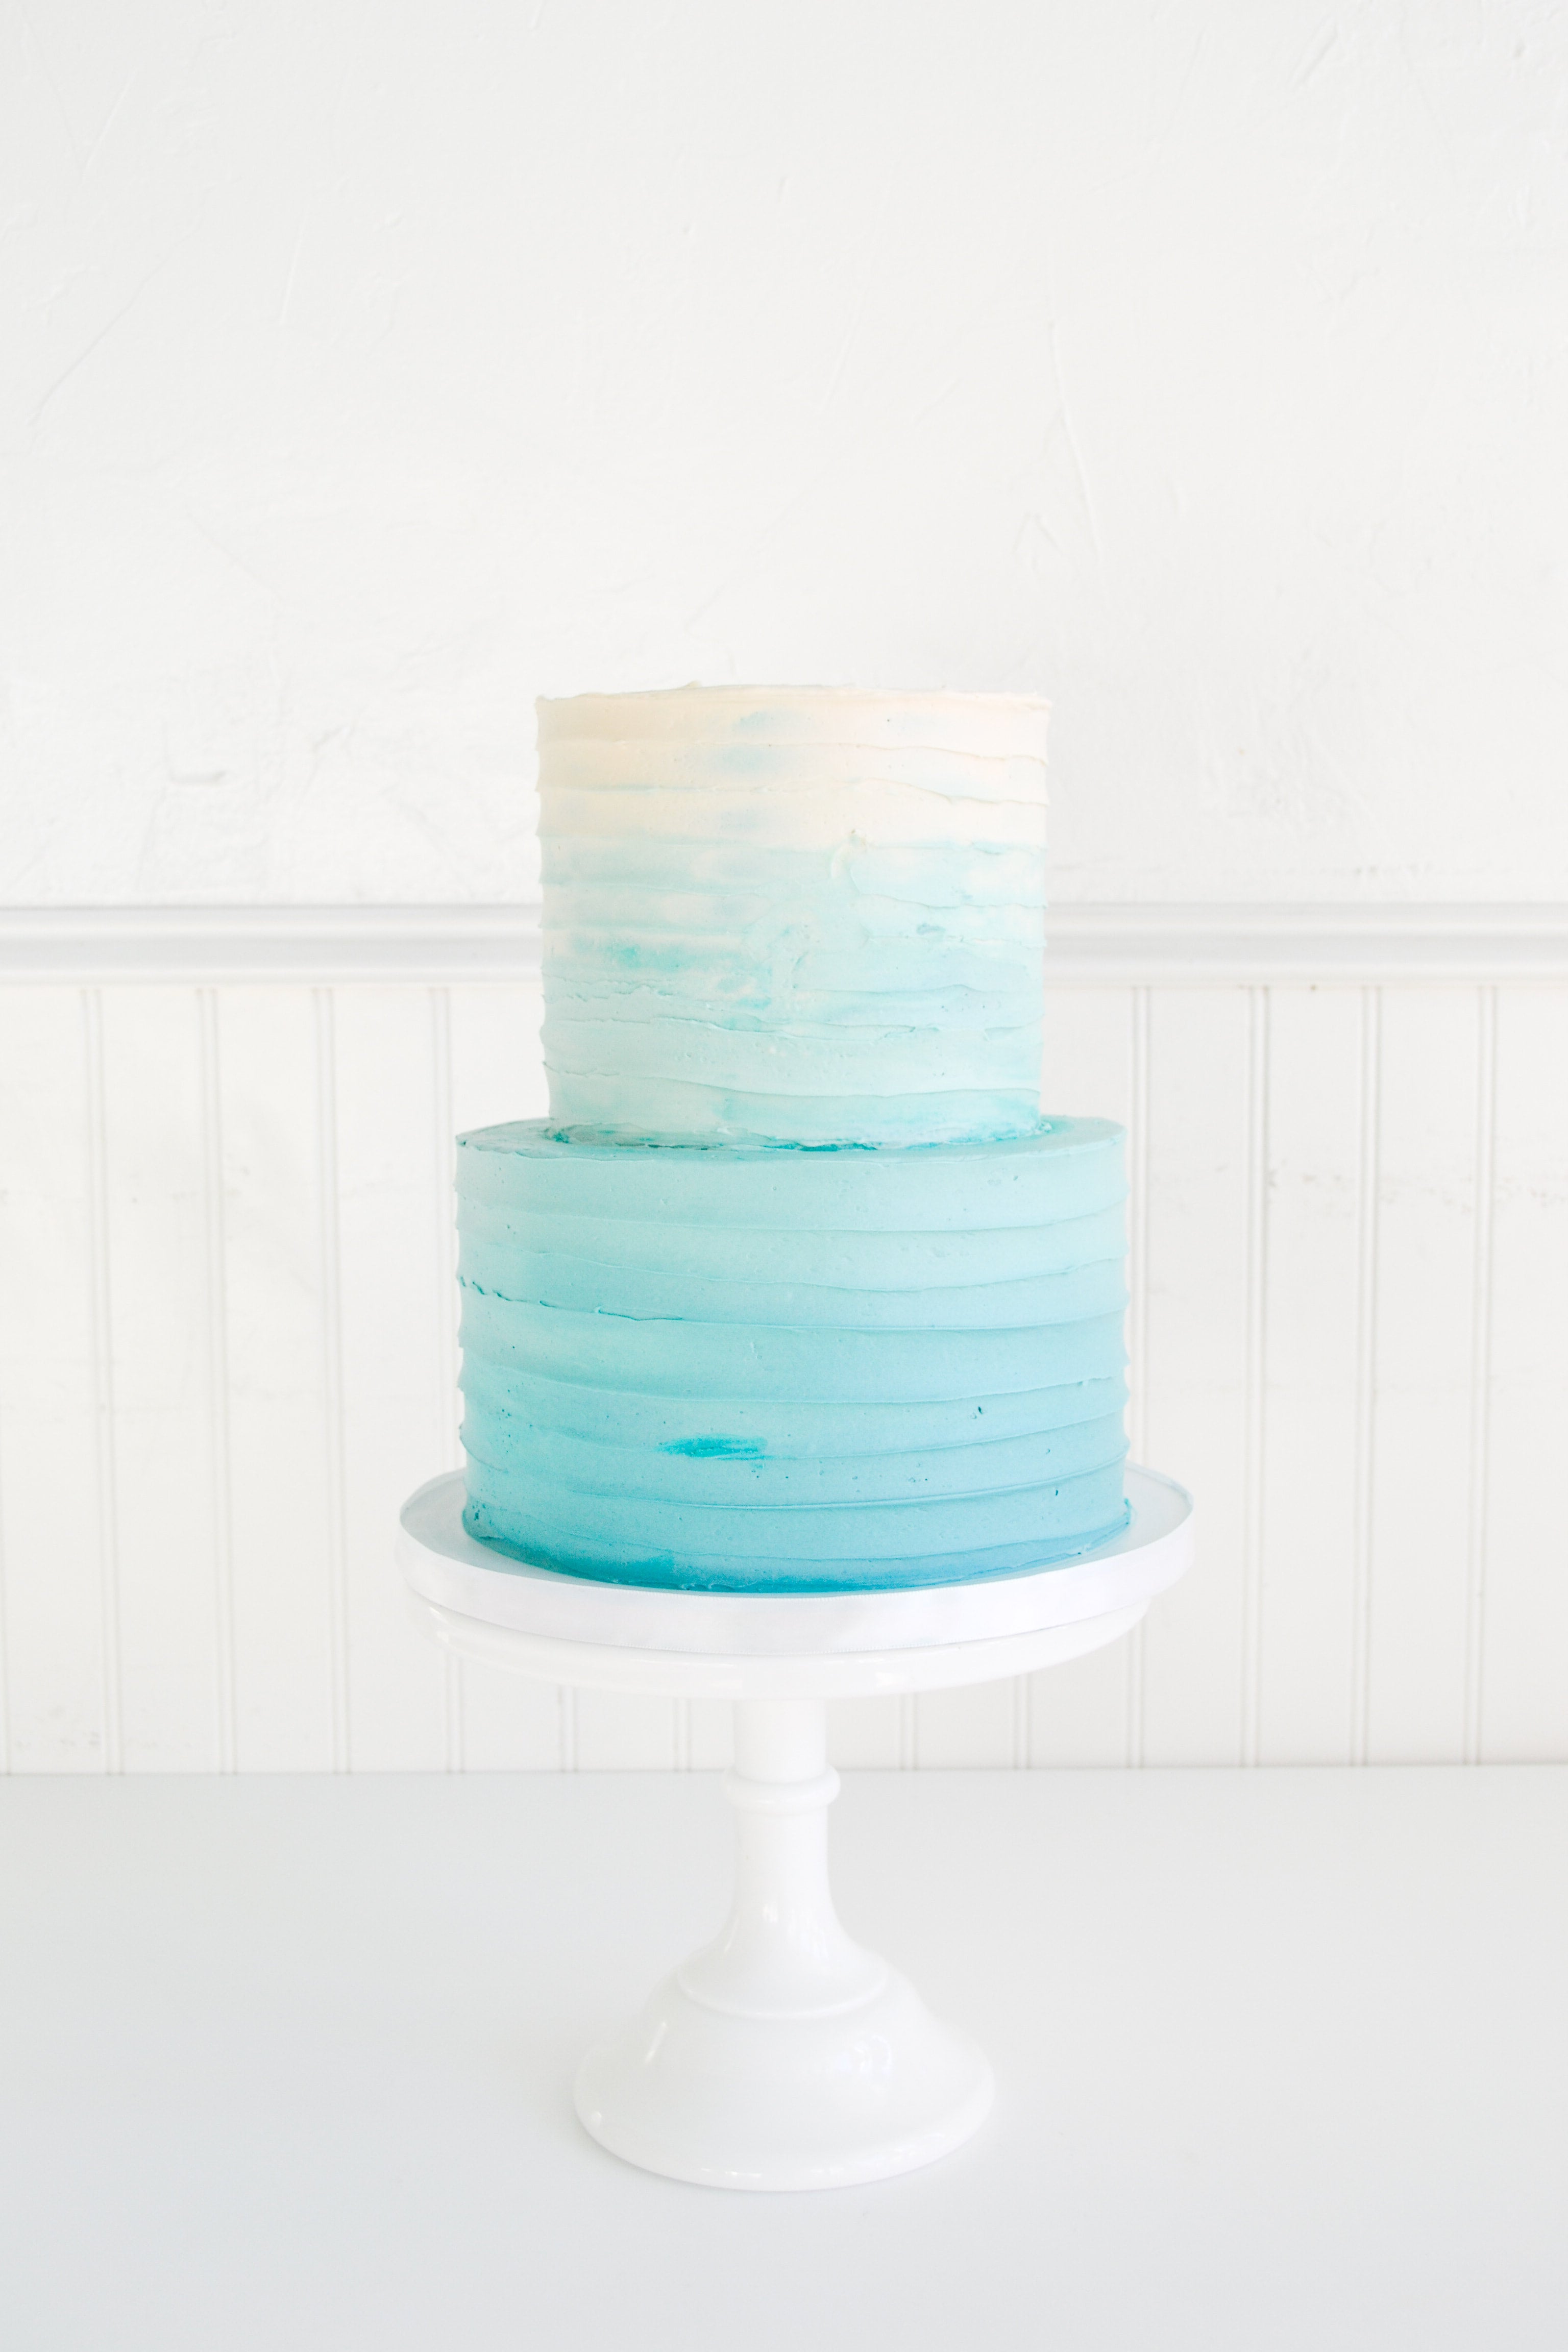 How to Make A Fancy Teal and White Engagement Cake - YouTube